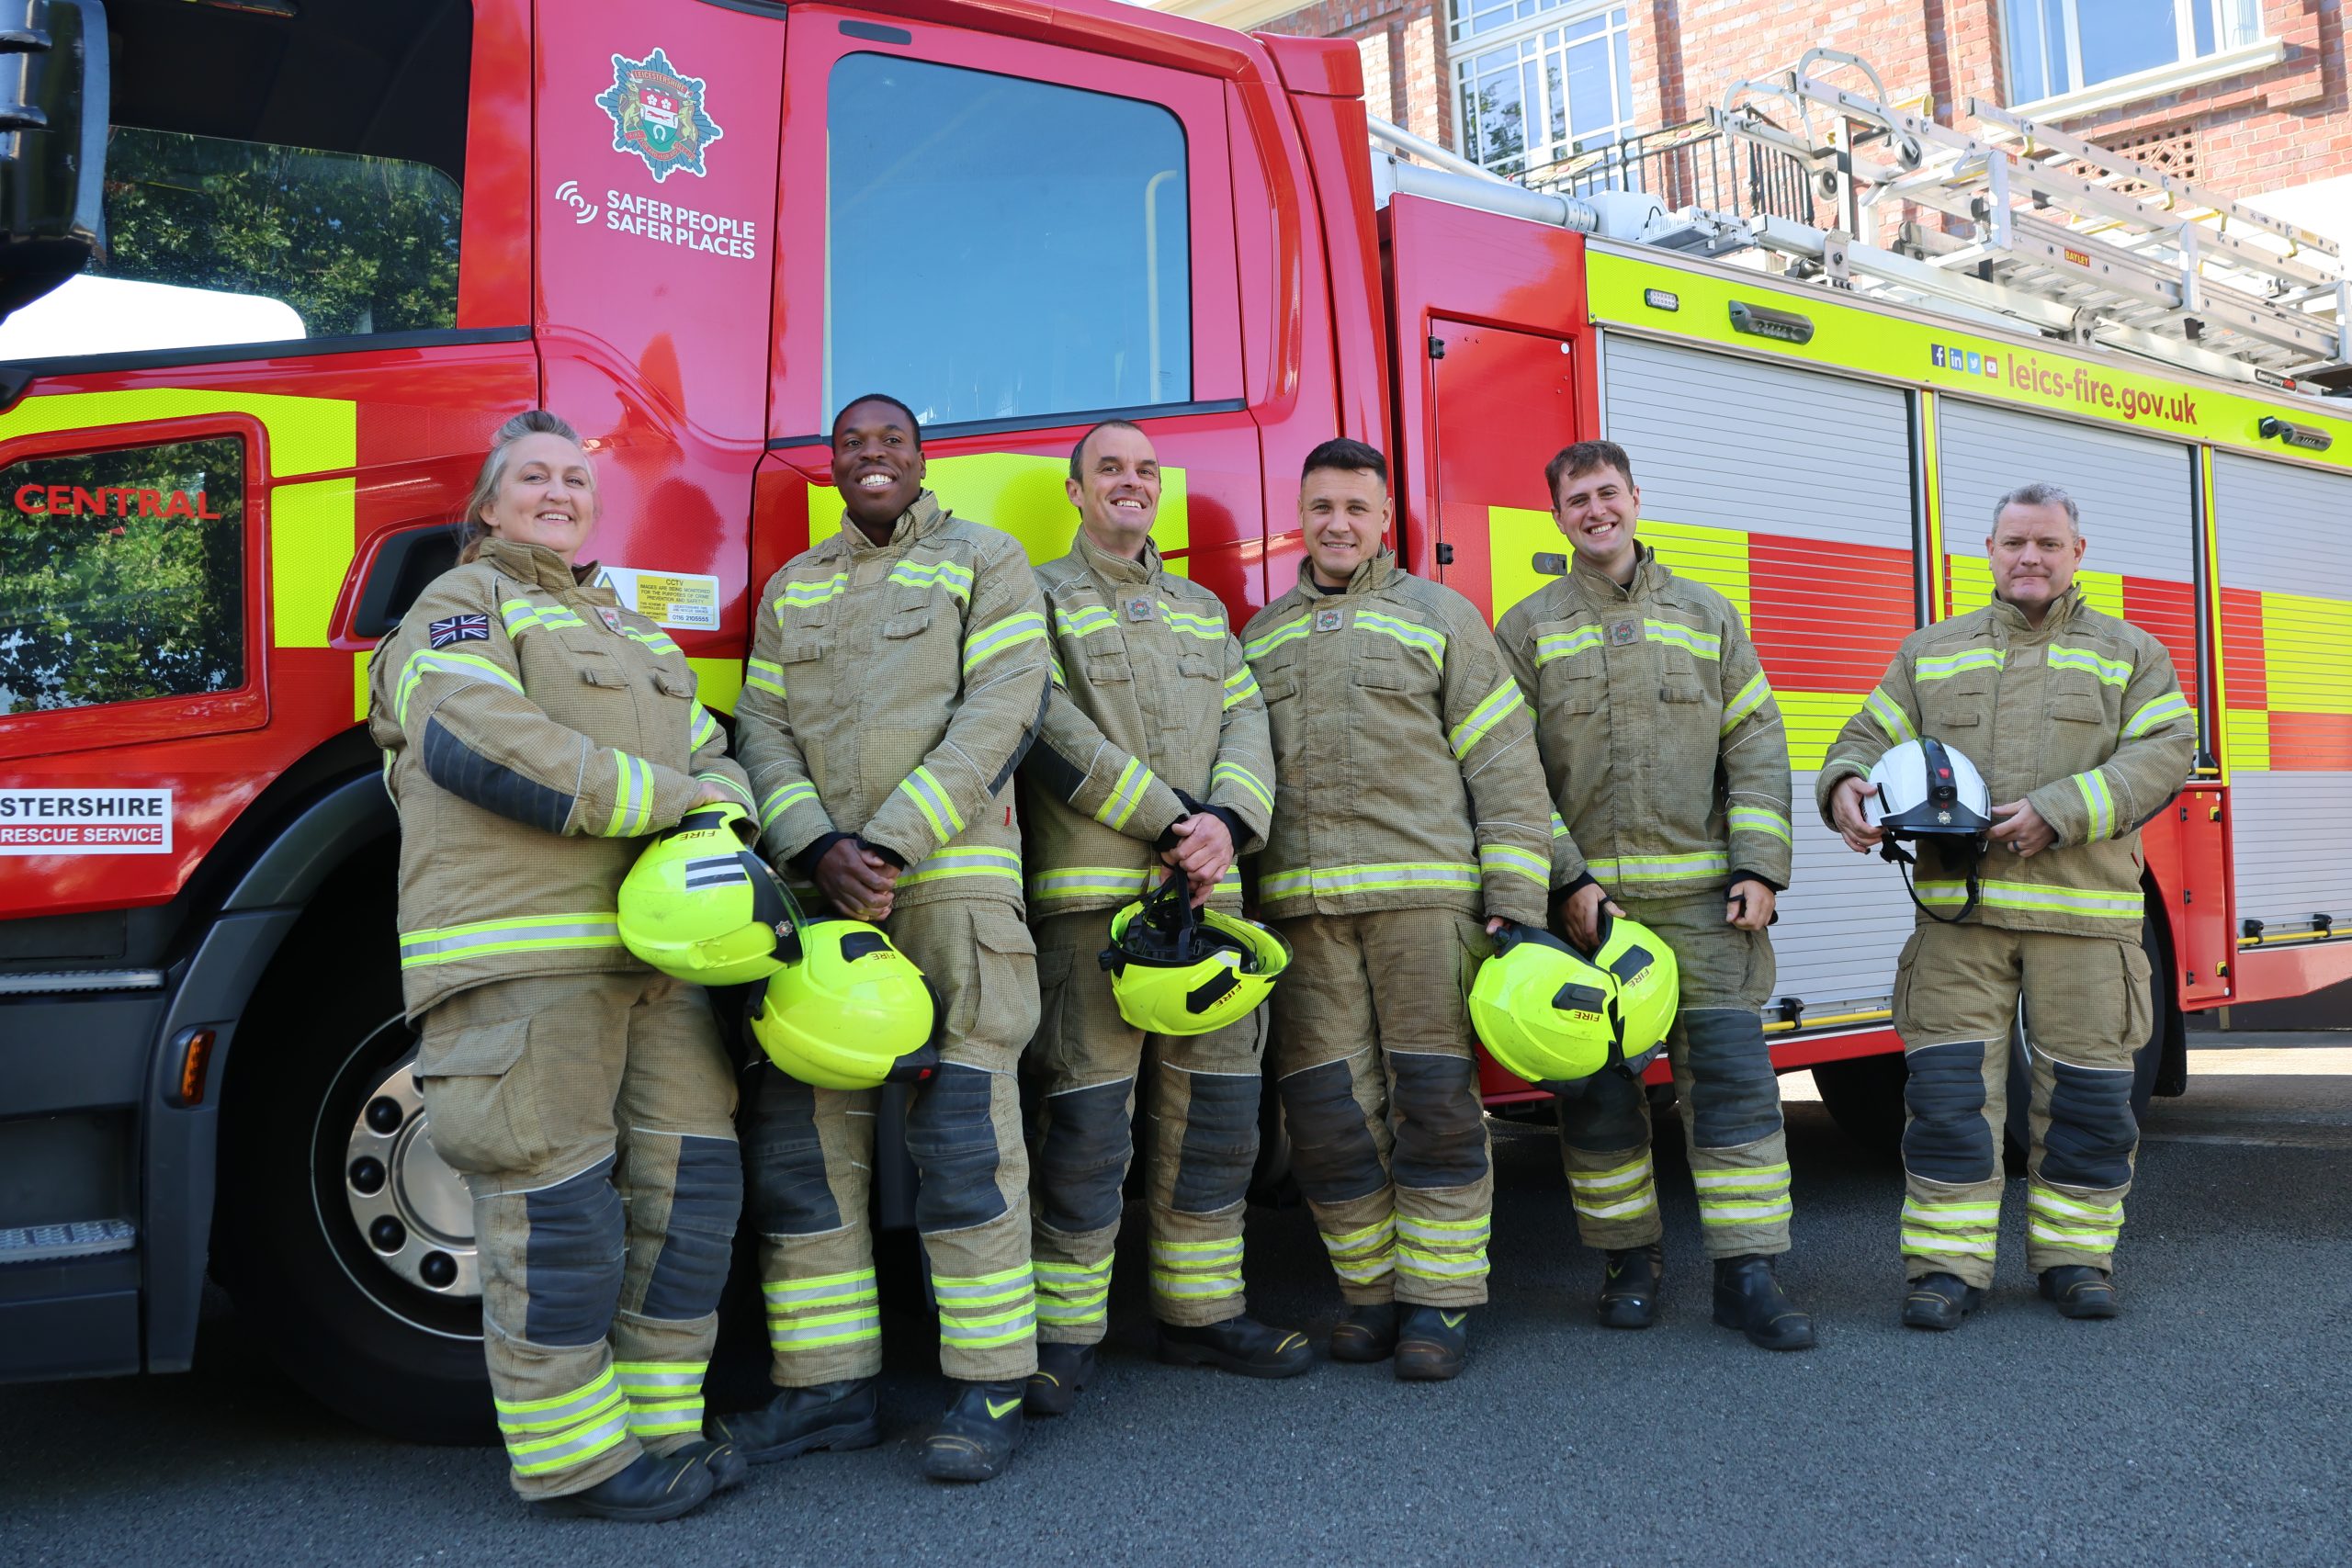 Image of Firefighters in their fire kit stood in front of a fire engine